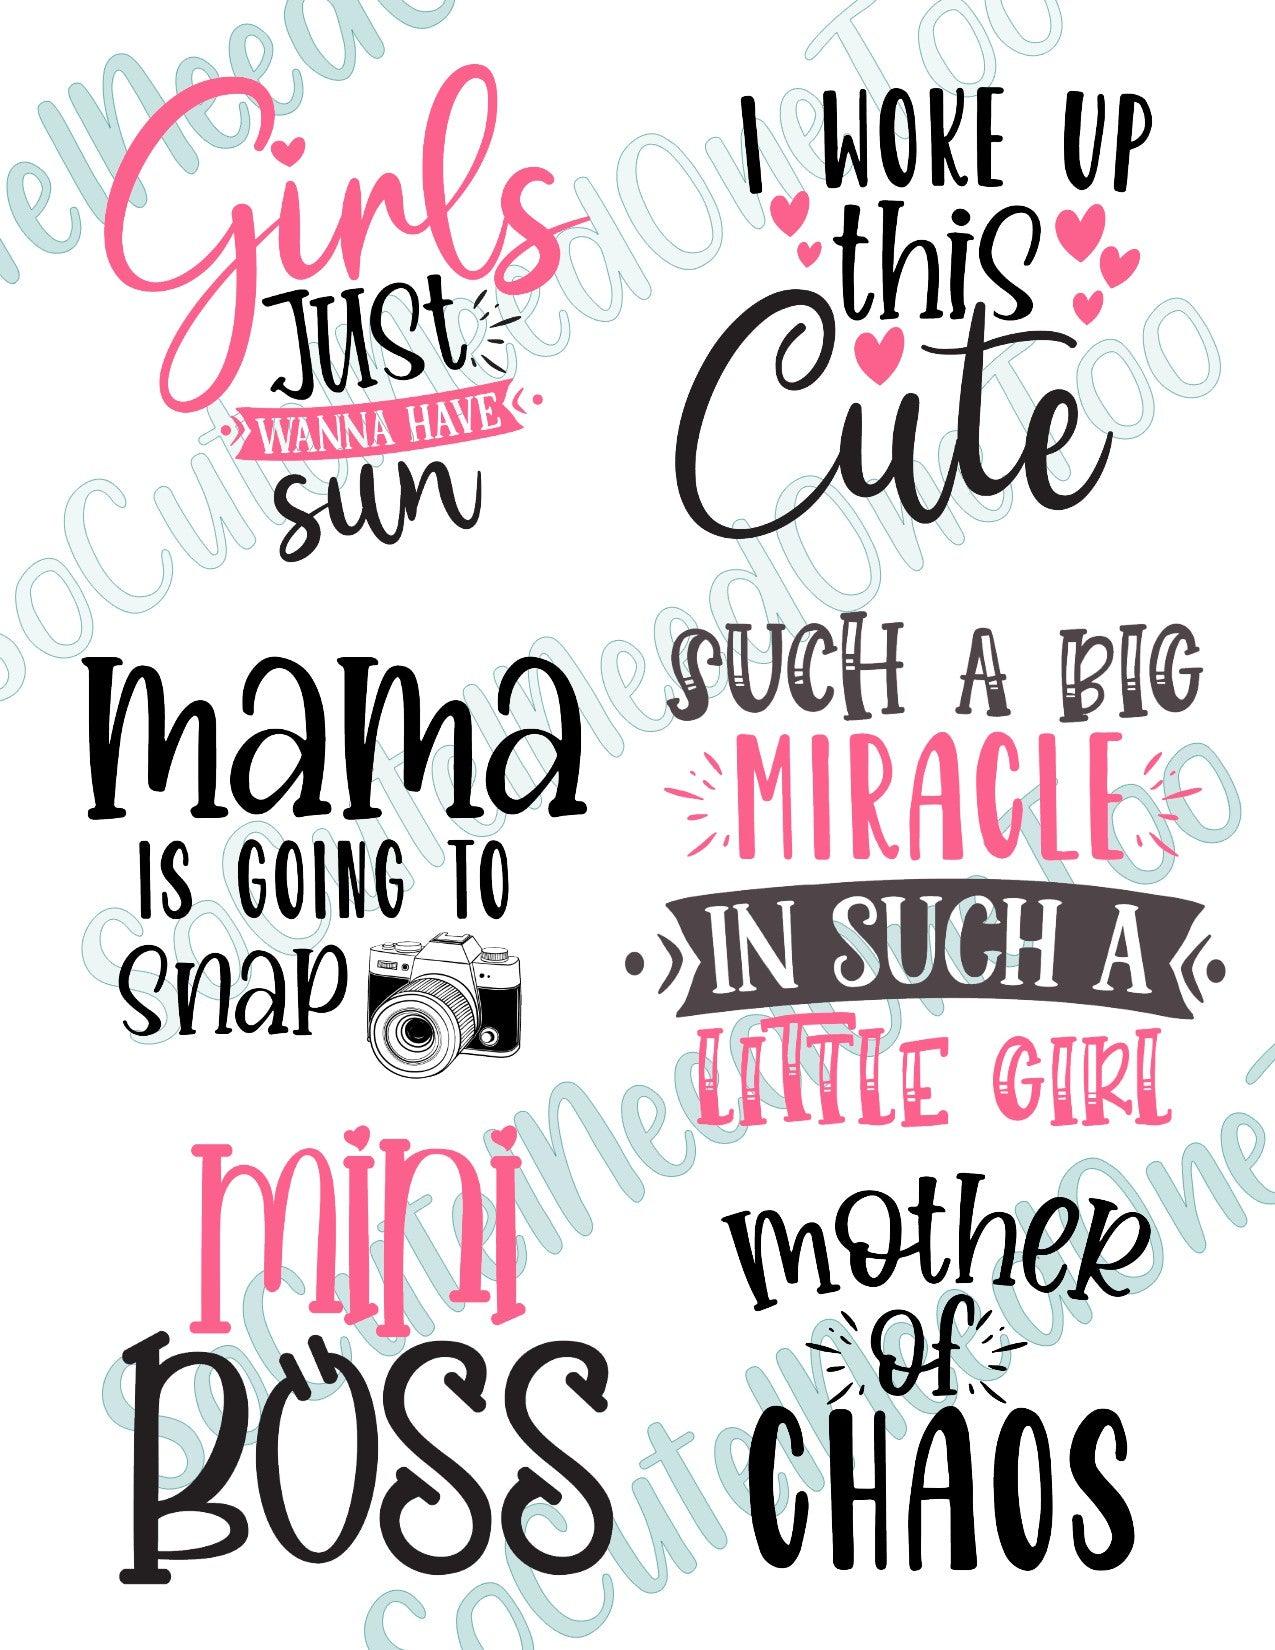 Mother's Bundle on Clear/White Waterslide Paper - Ready To Use - SoCuteINeedOneToo